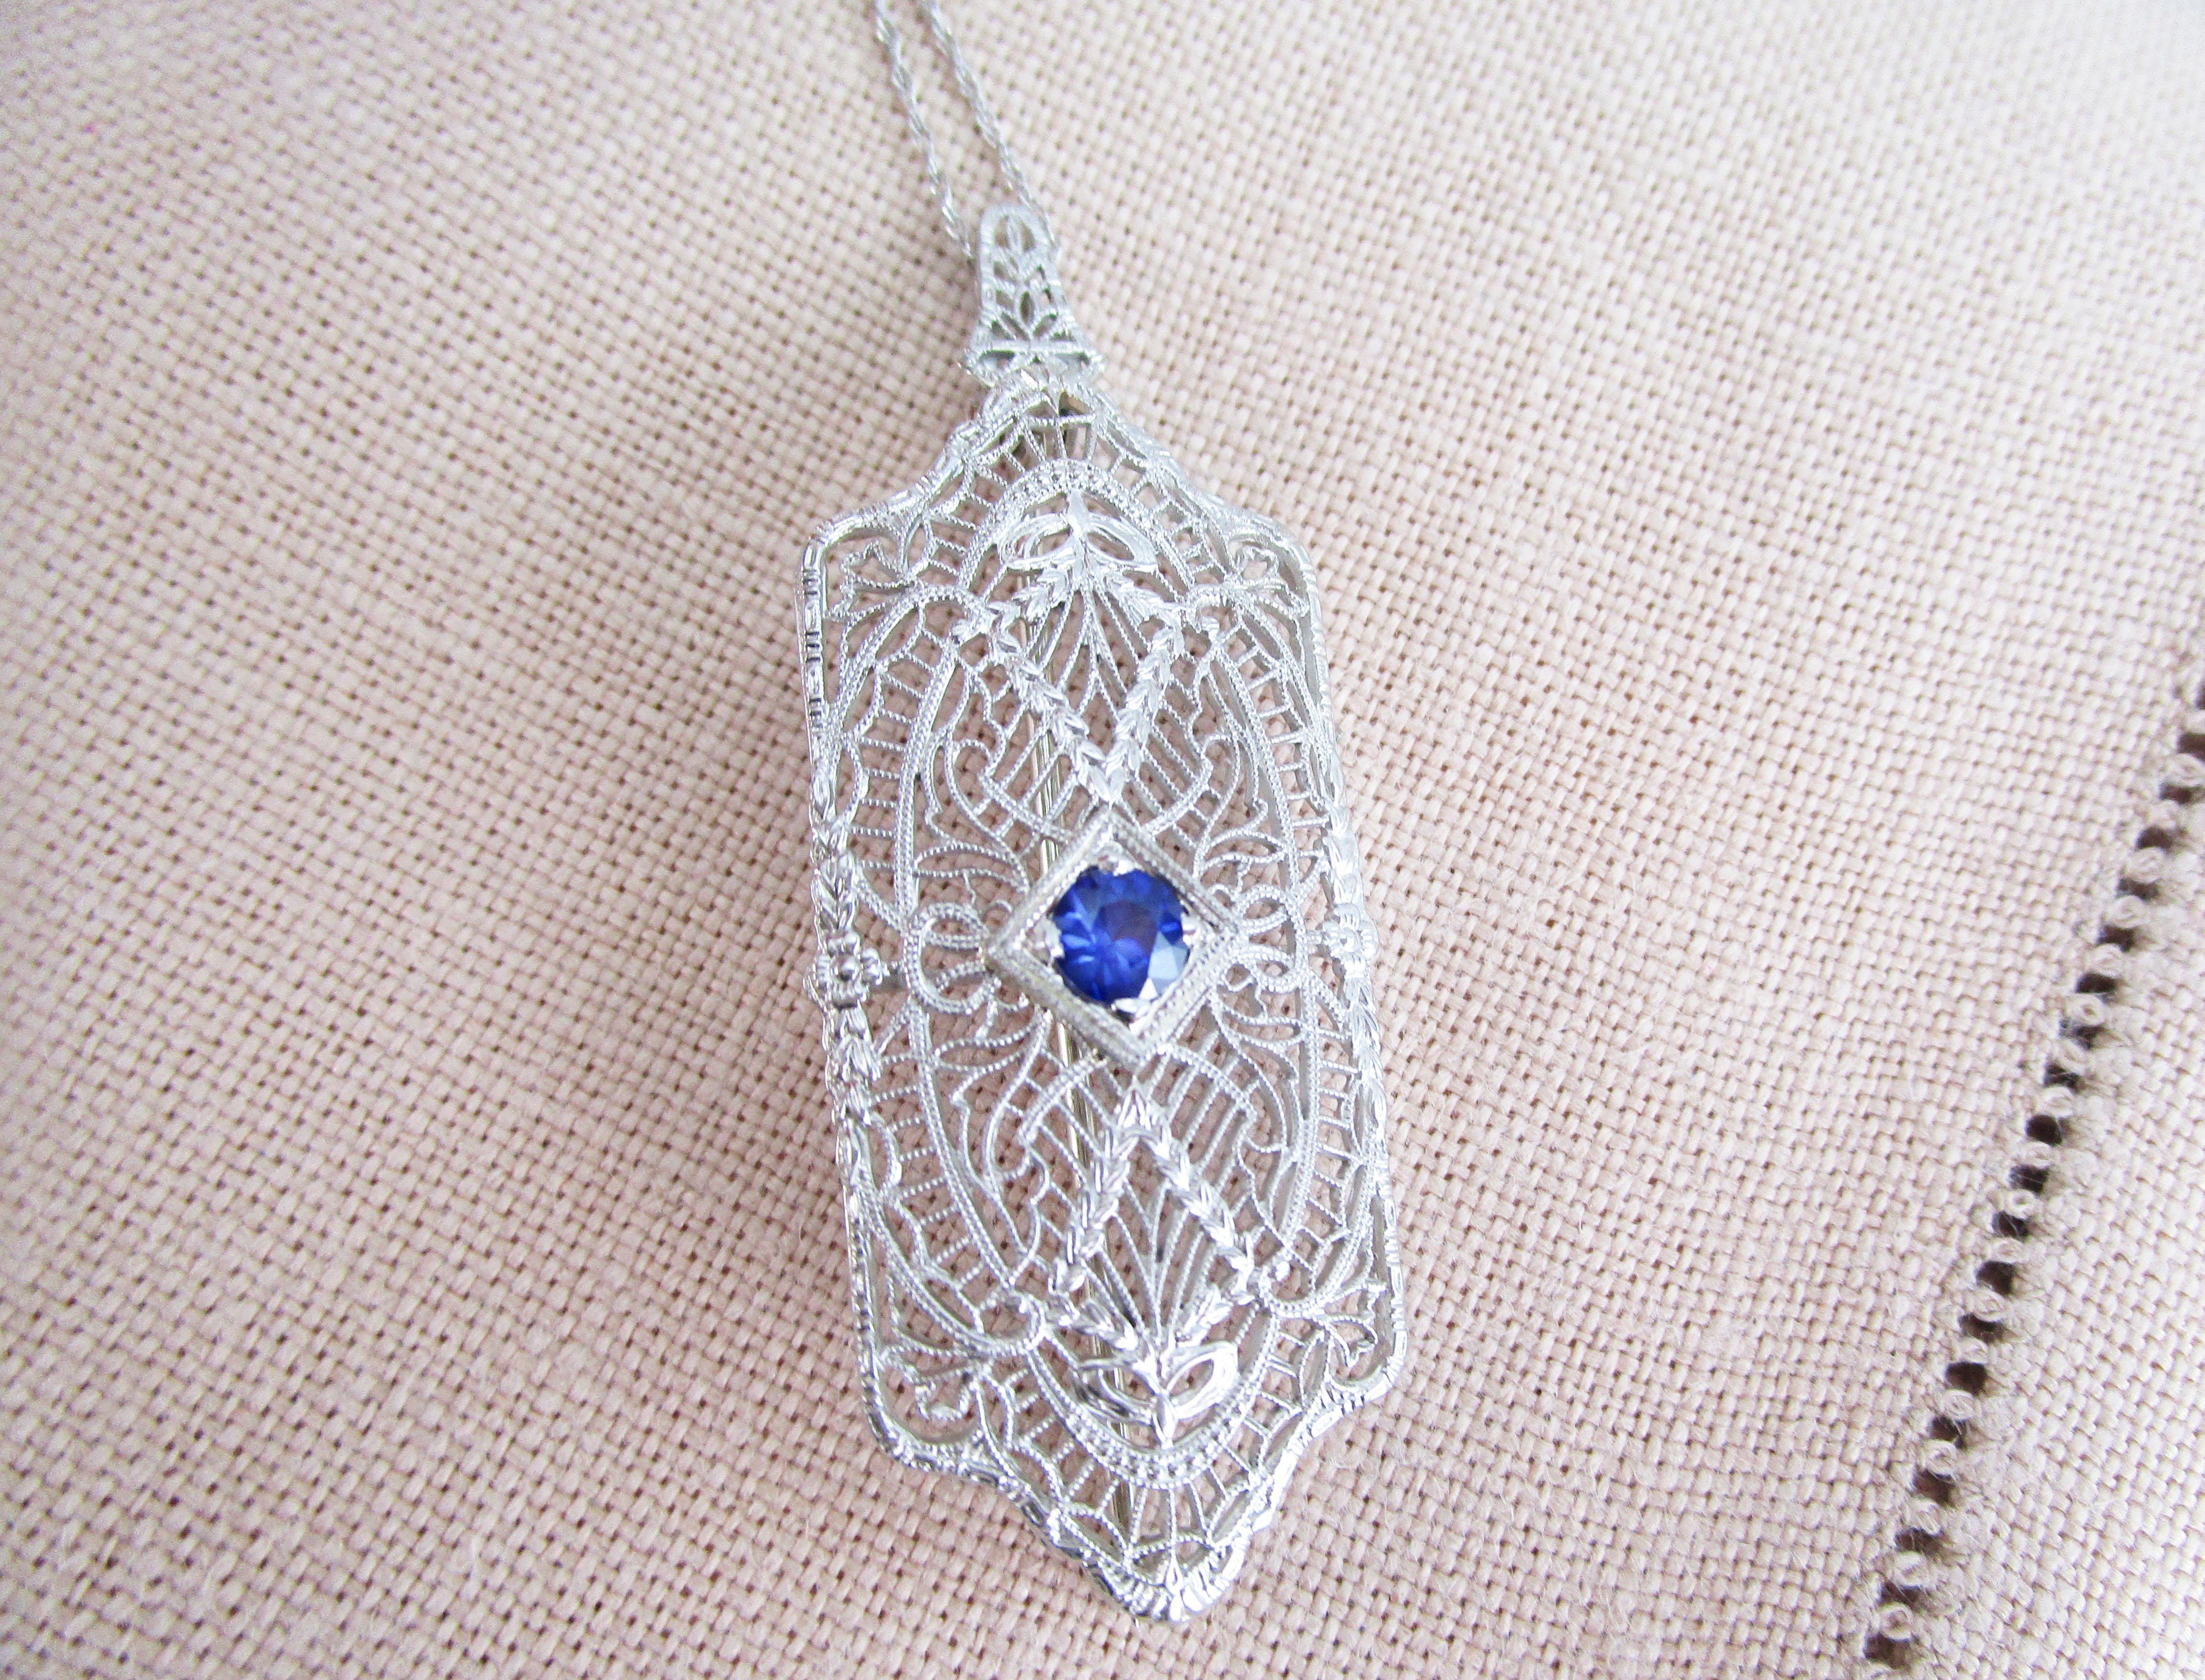 This is an enchanting Art Deco pin pendant in 14k white gold with beautiful filigree work and a breathtakingly blue sapphire in the center. The delicate filigree creates a lace-like look that makes this pin pendant delicate, but incredibly elegant!